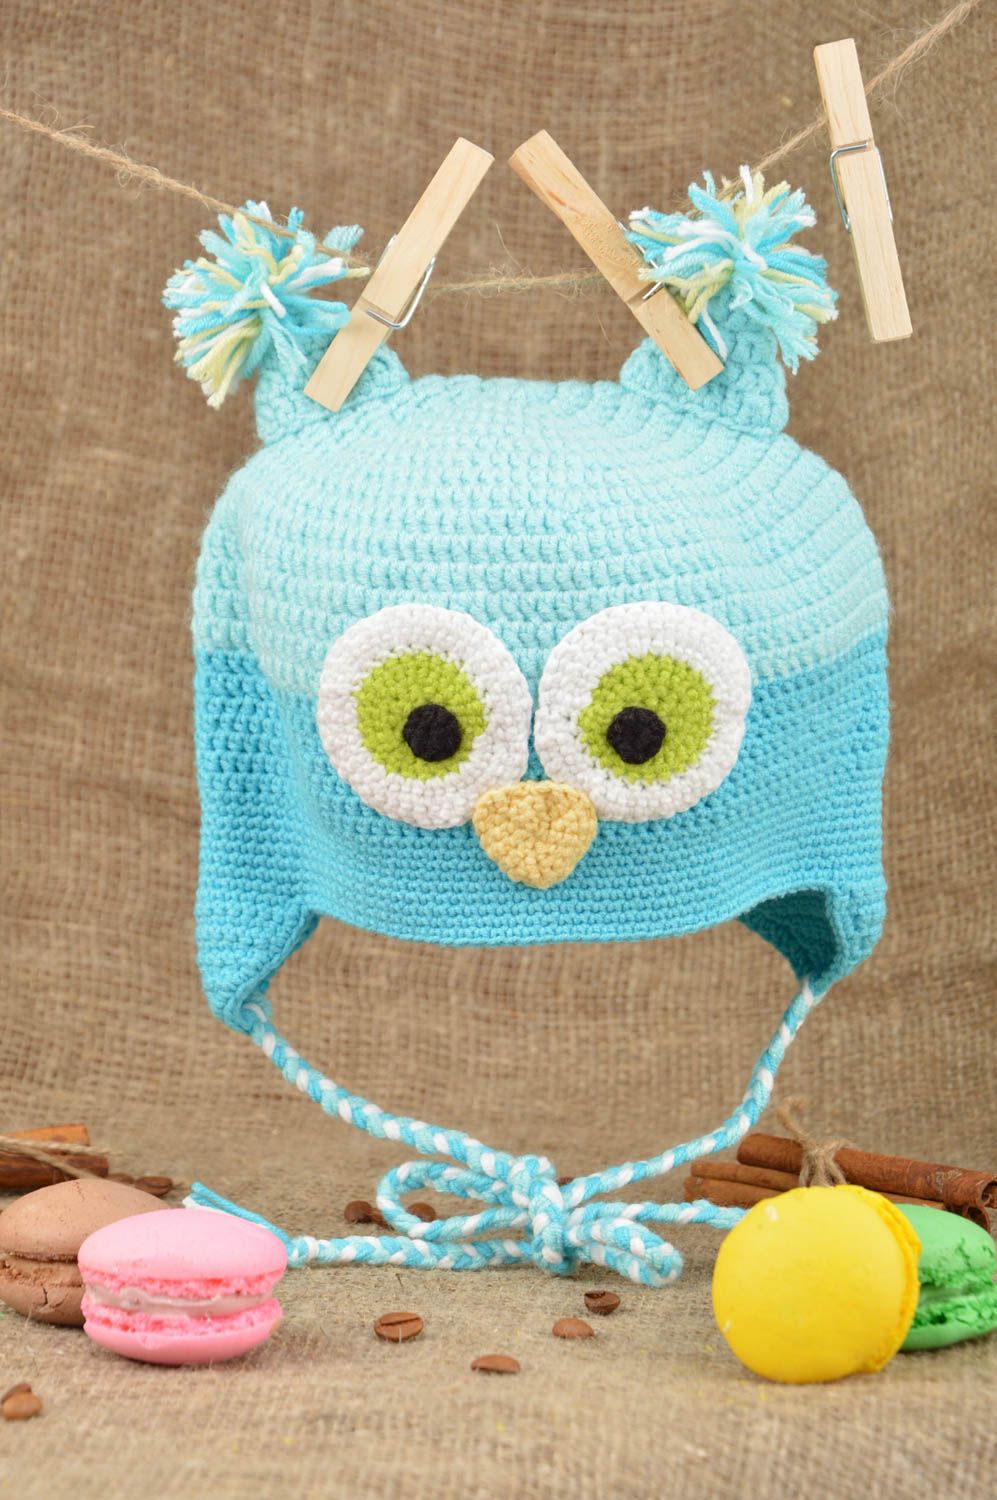 Handmade cute designer crocheted cap turquoise owl made of cotton and wool photo 1